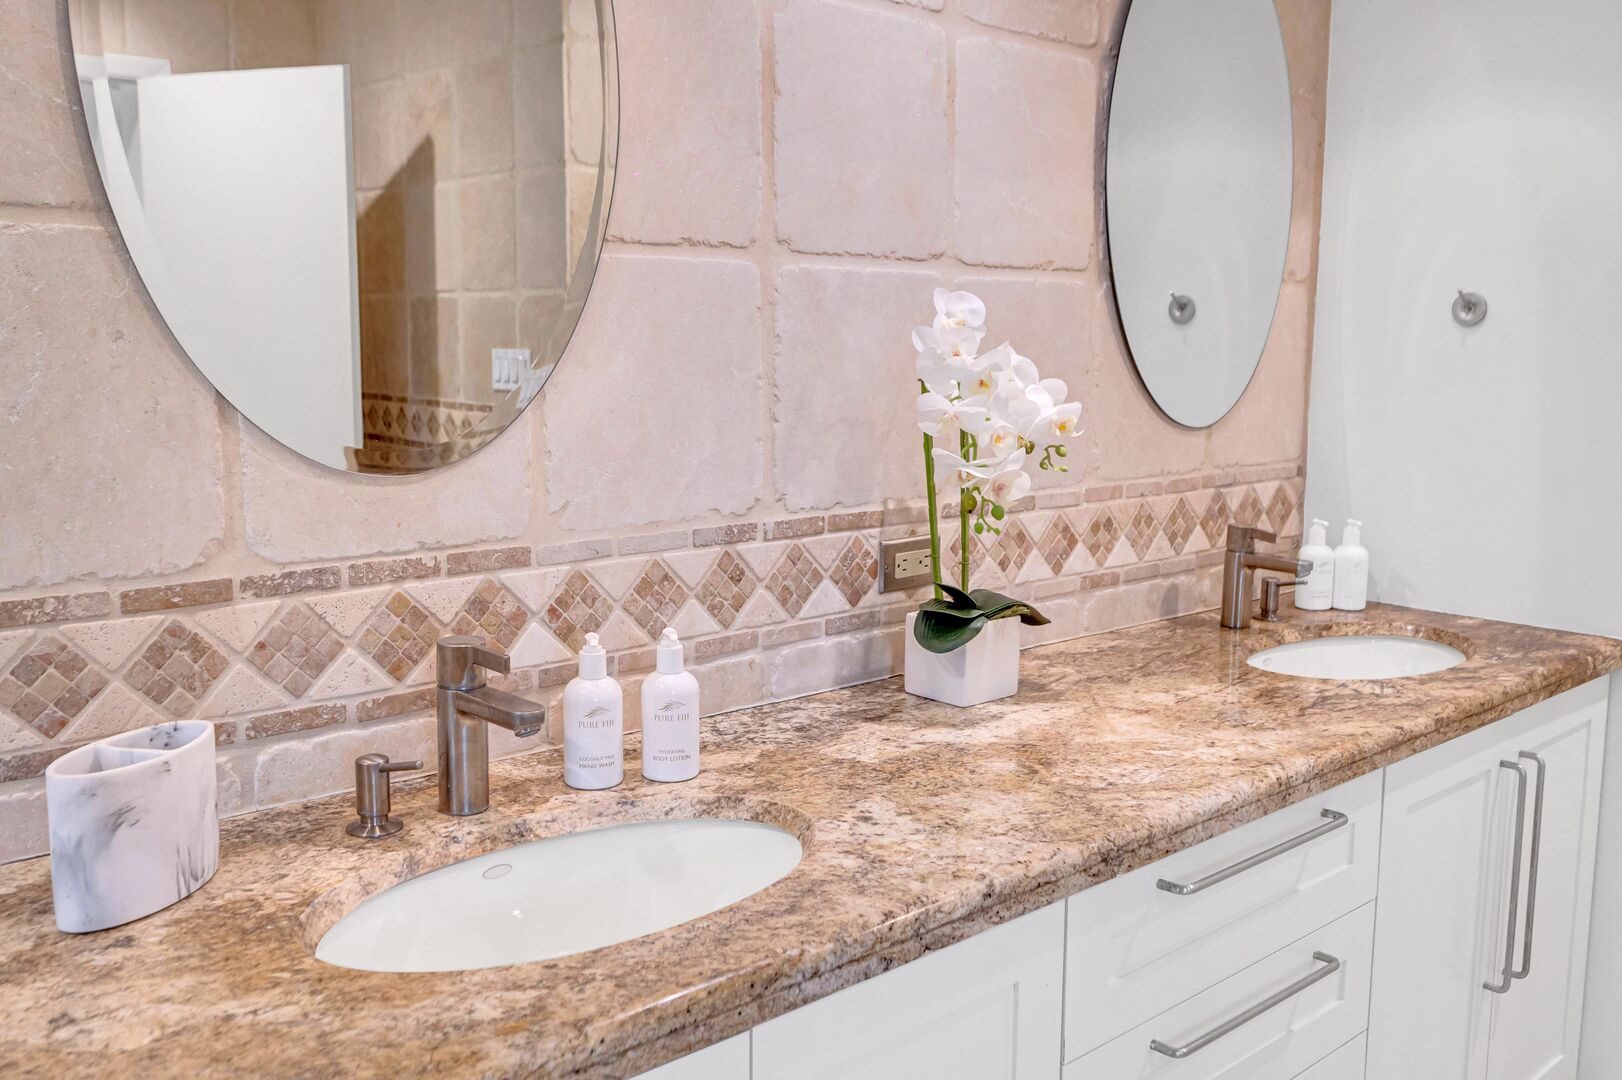 The master bathroom features a double vanity.